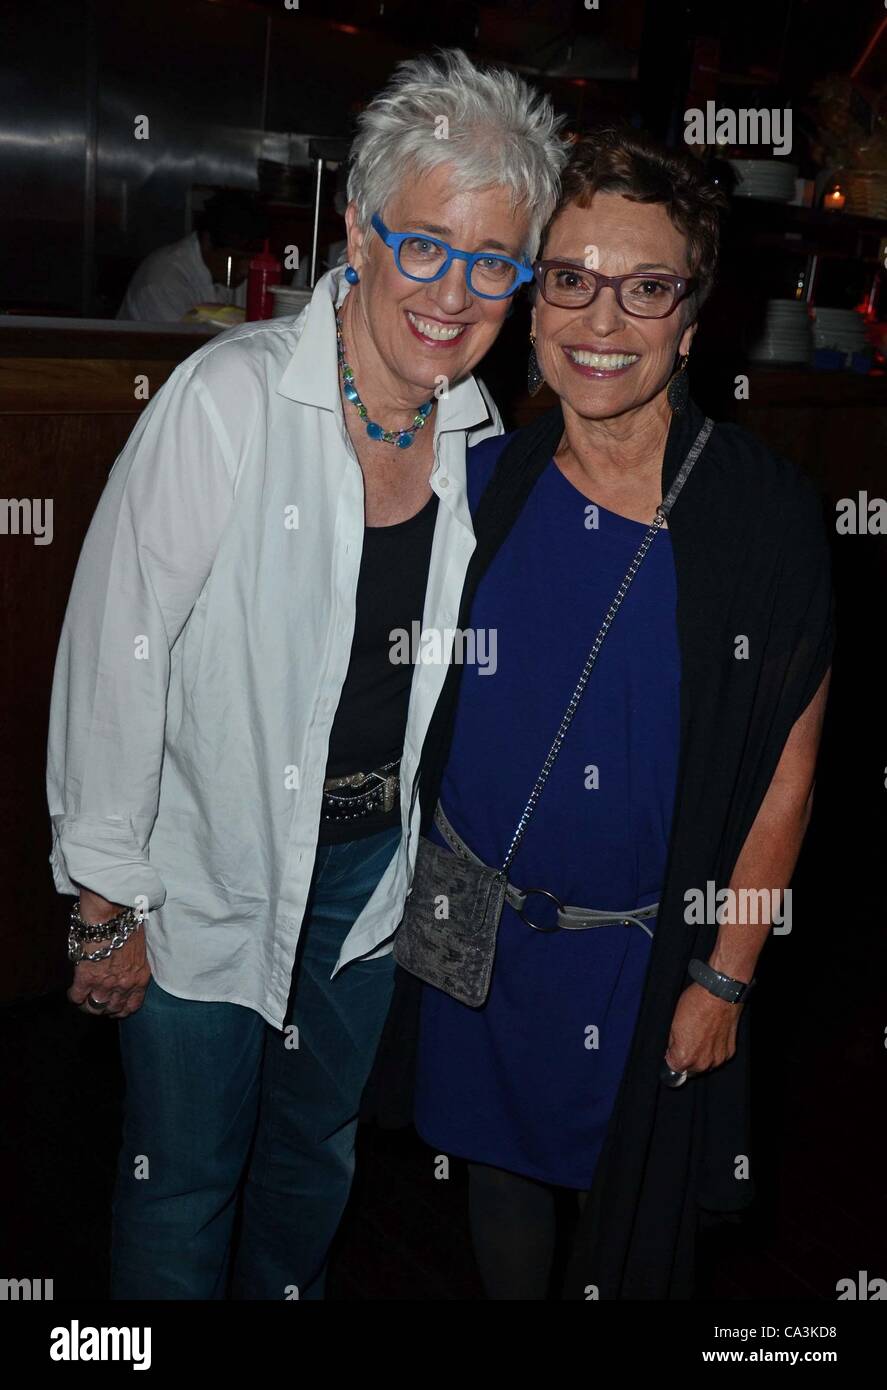 Bobbie Birle, Beverly Kopf at arrivals for CHELY WRIGHT: WISH ME AWAY Premiere, Quad Cinema, New York, NY June 1, 2012. Photo By: Derek Storm/Everett Collection Stock Photo